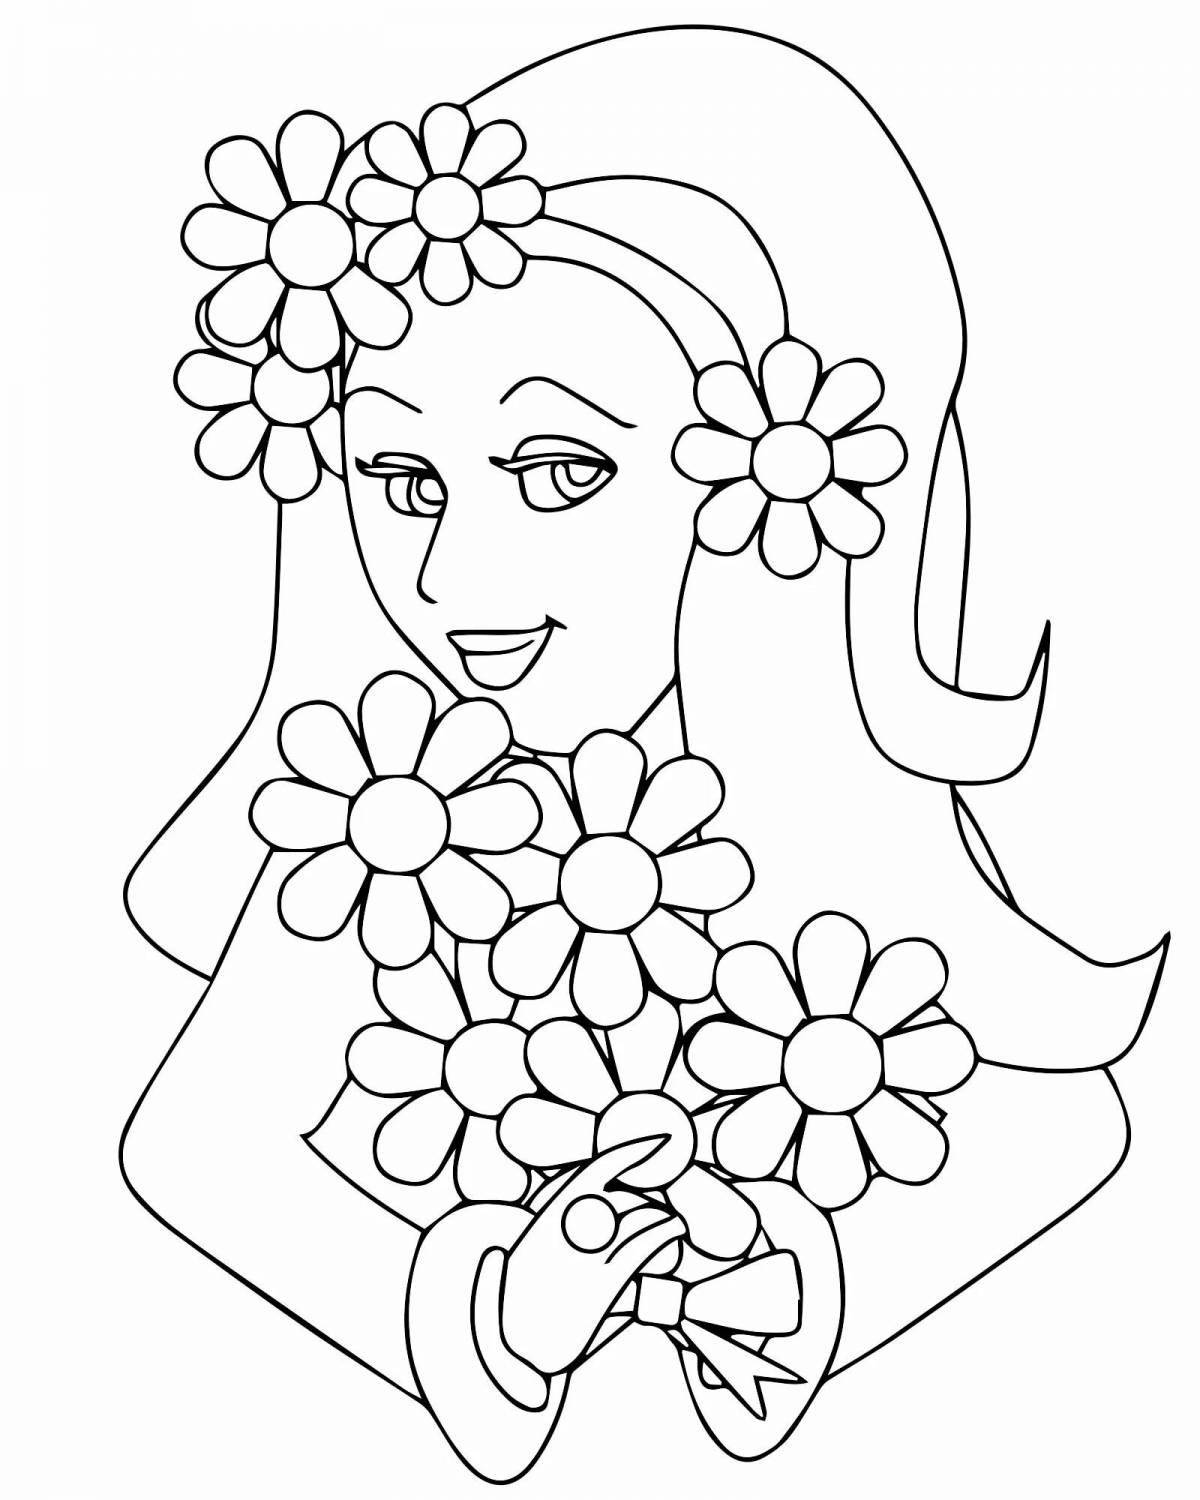 Playful my mom coloring page